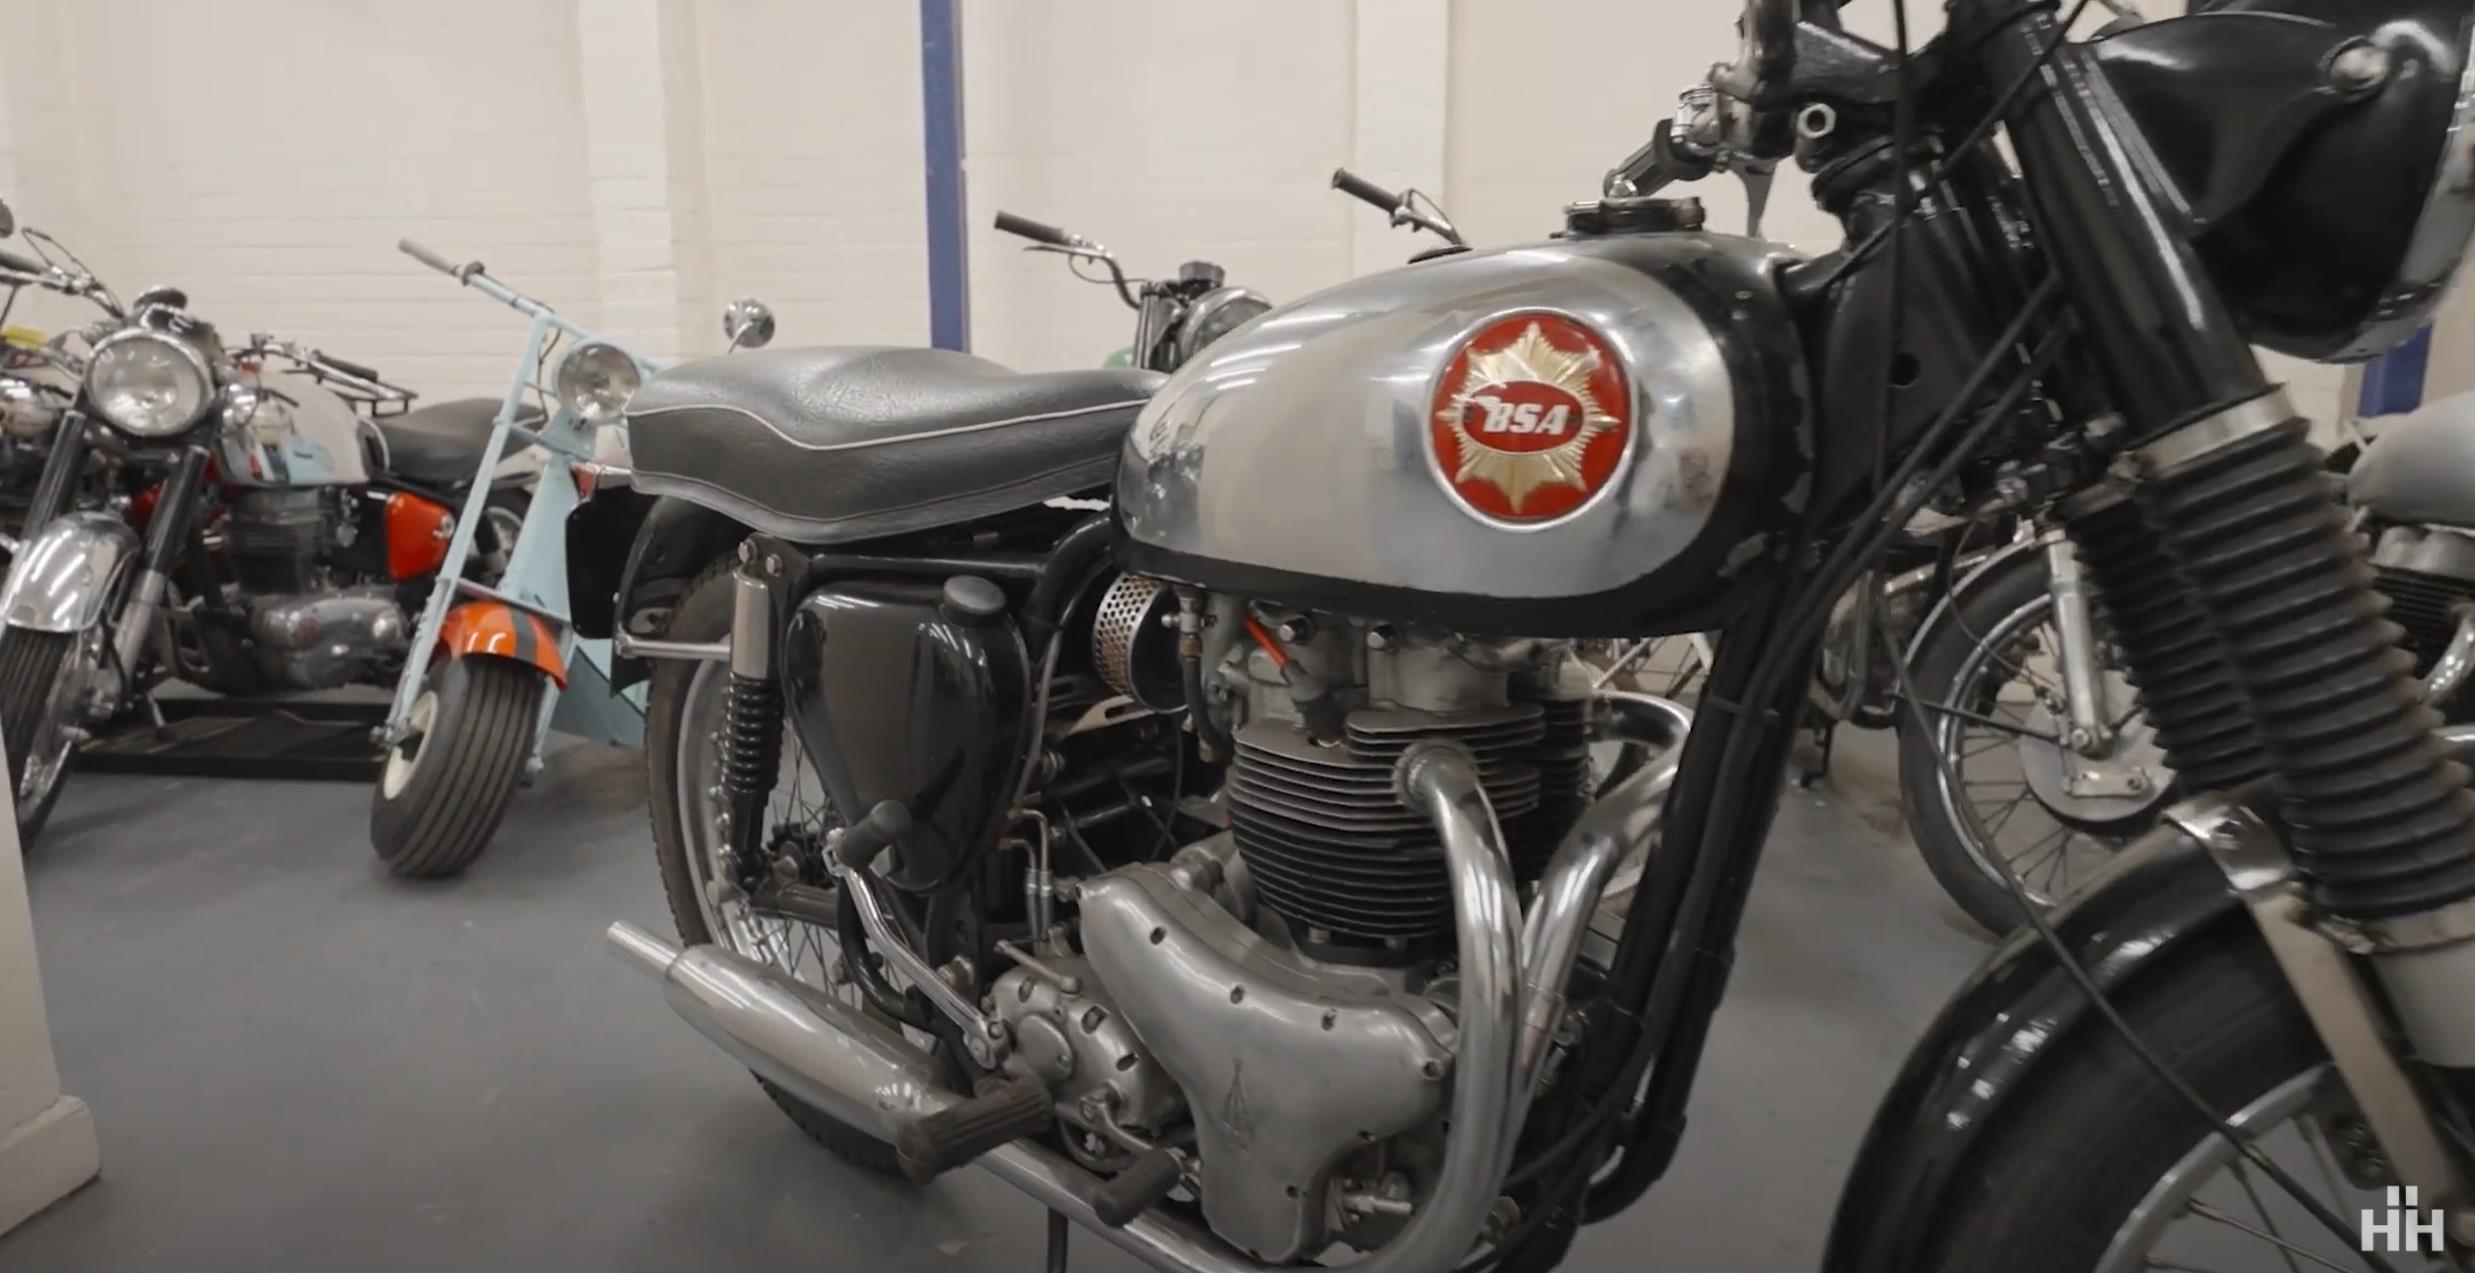 H&H National Motorcycle Museum Auction